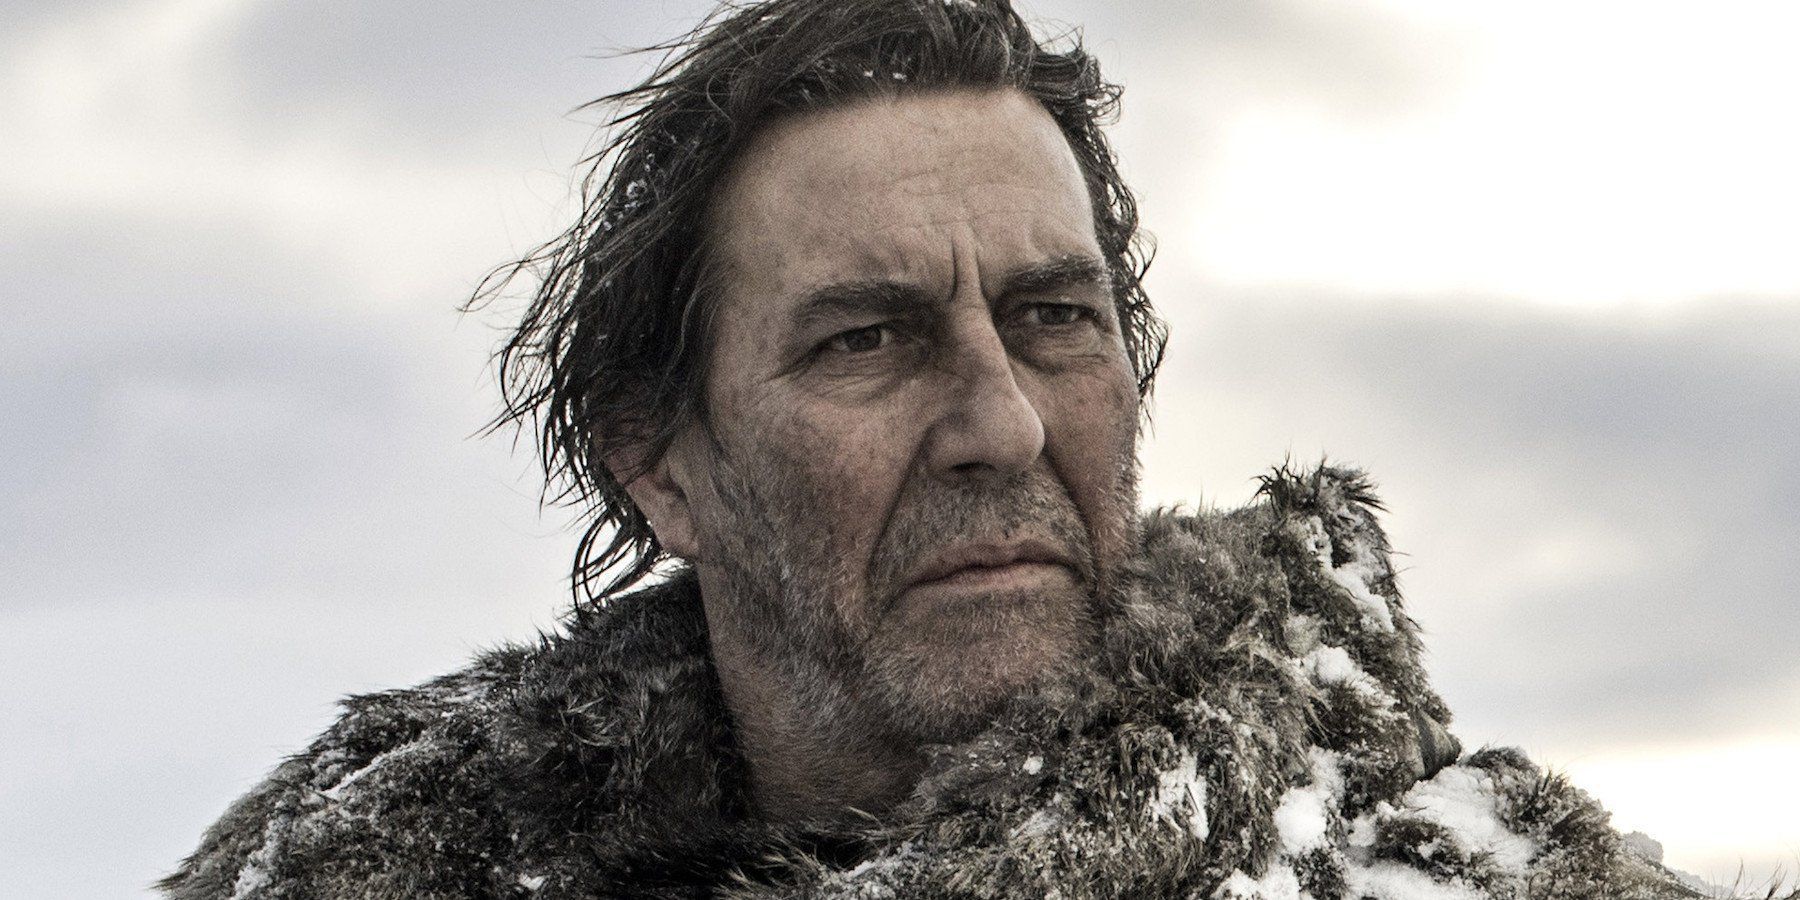 Mance Rayder looks on during a scene in Game of Thrones